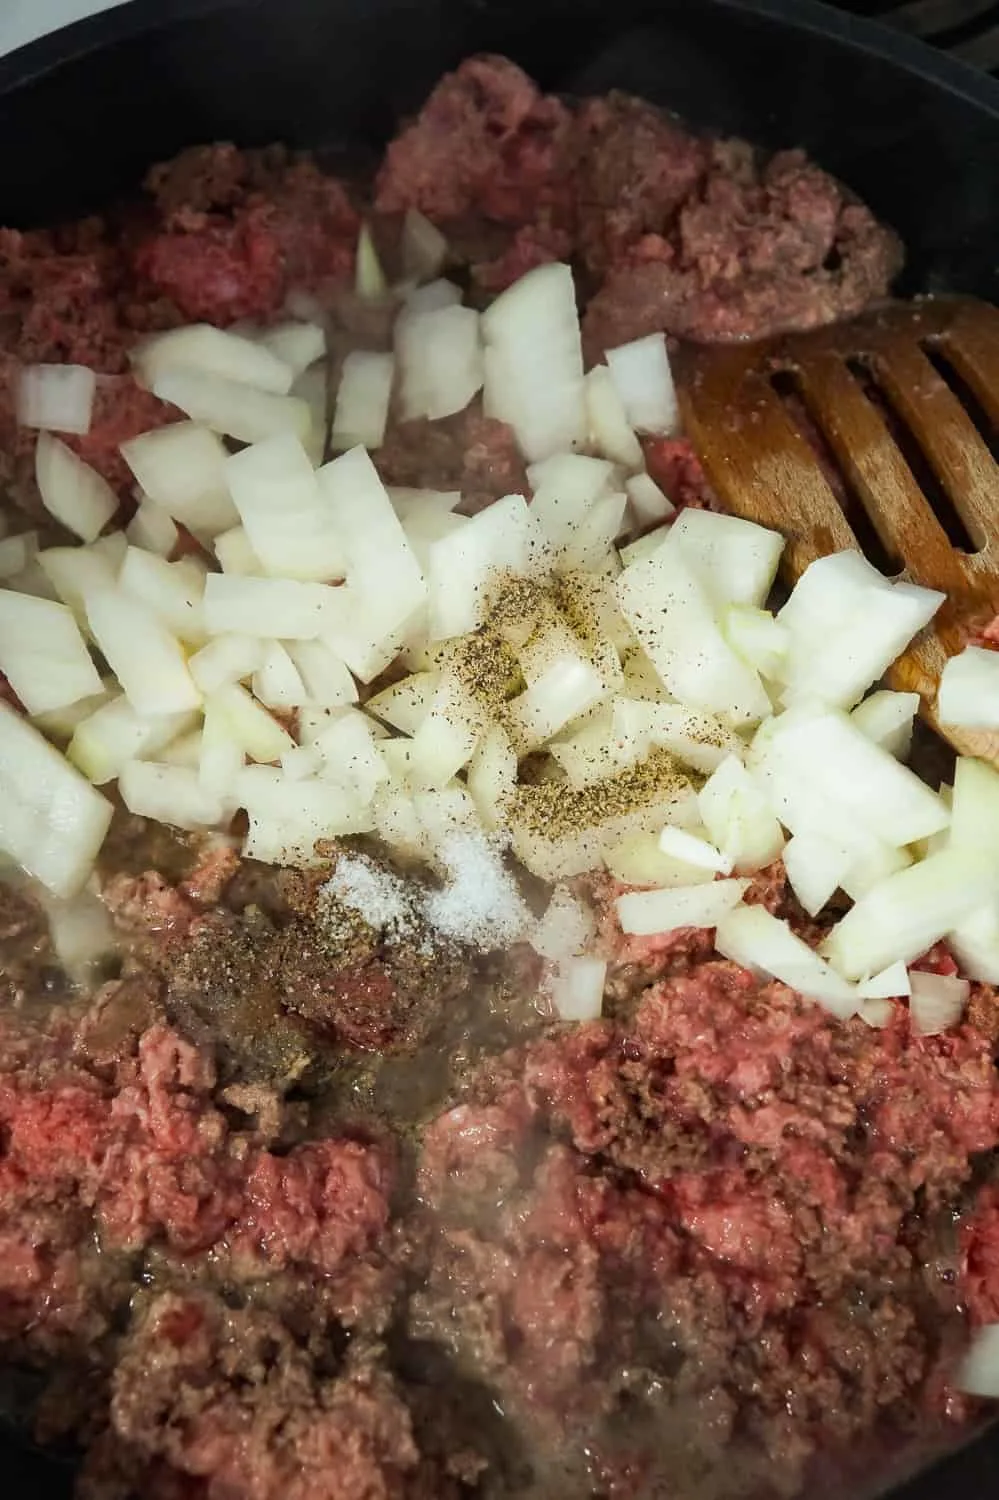 diced onions and ground beef cooking in a frying pan